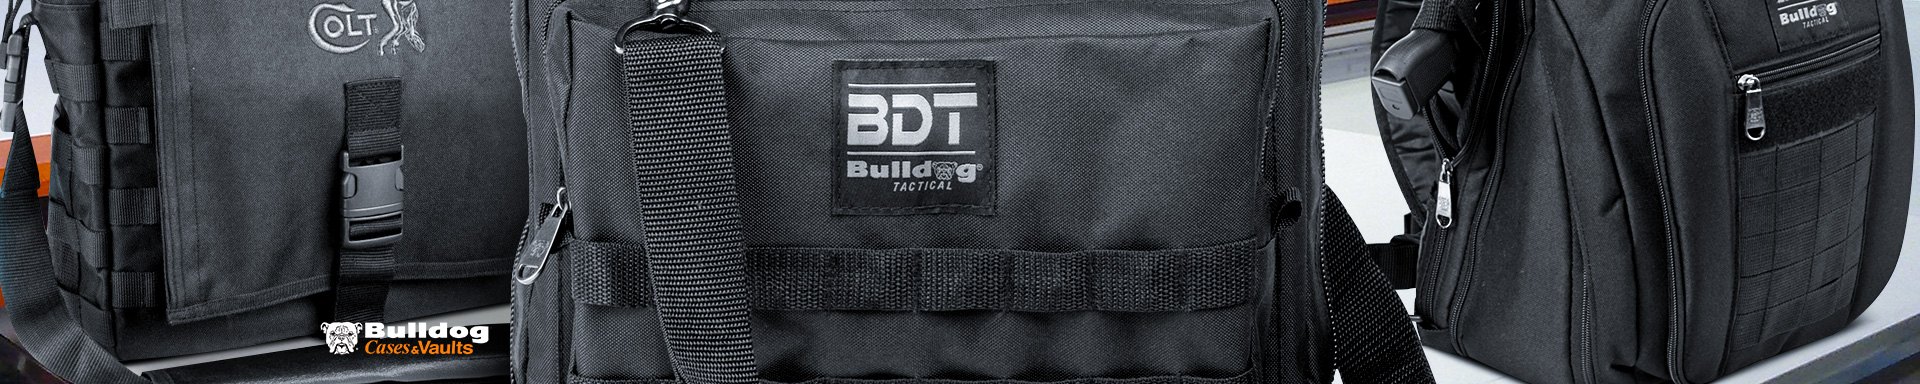 Bulldog Cases & Vaults Tactical Pouches & Organizers